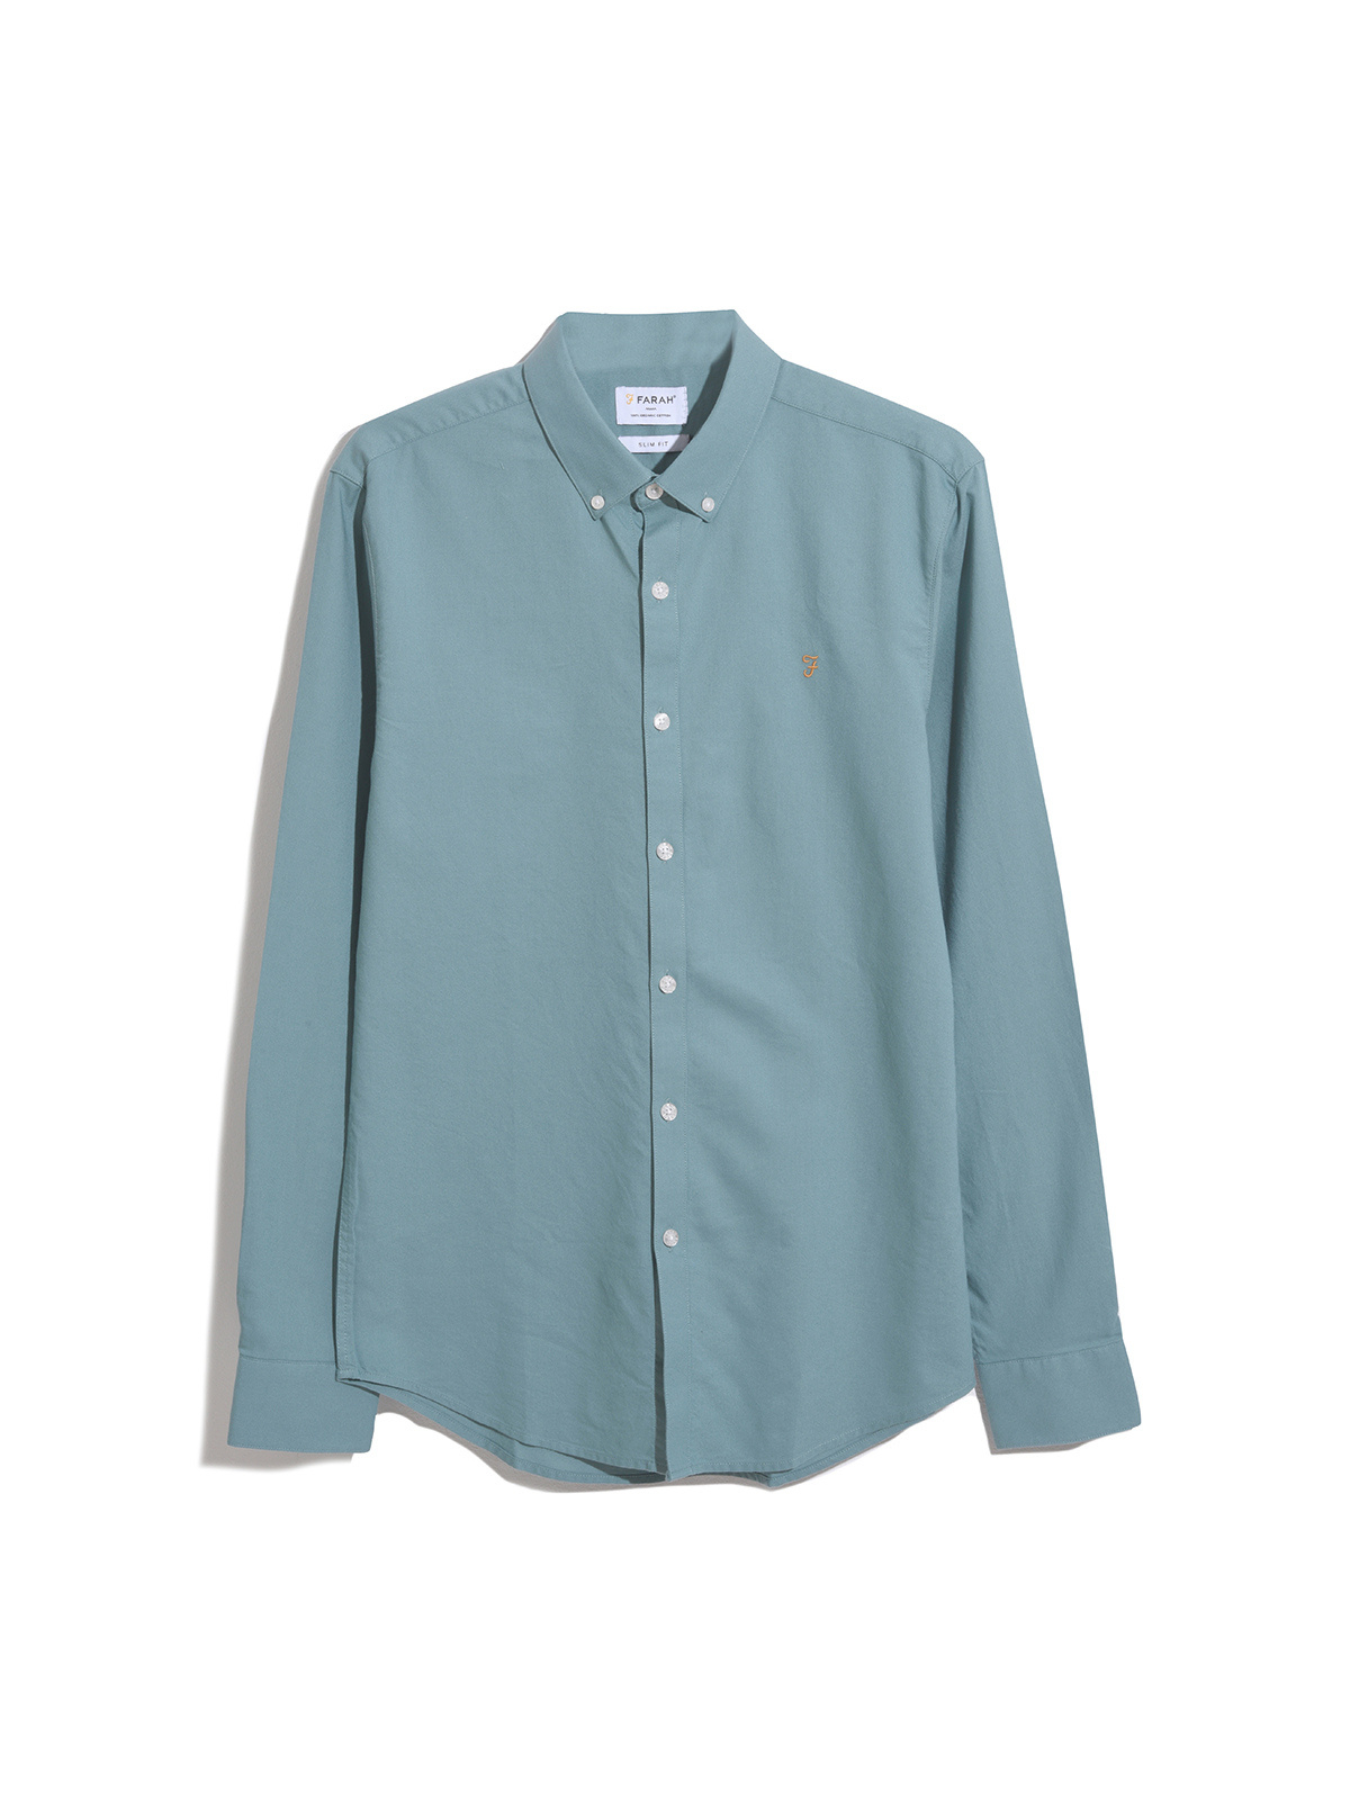 View Brewer Slim Fit Organic Cotton Long Sleeve Shirt In Brook Blue information